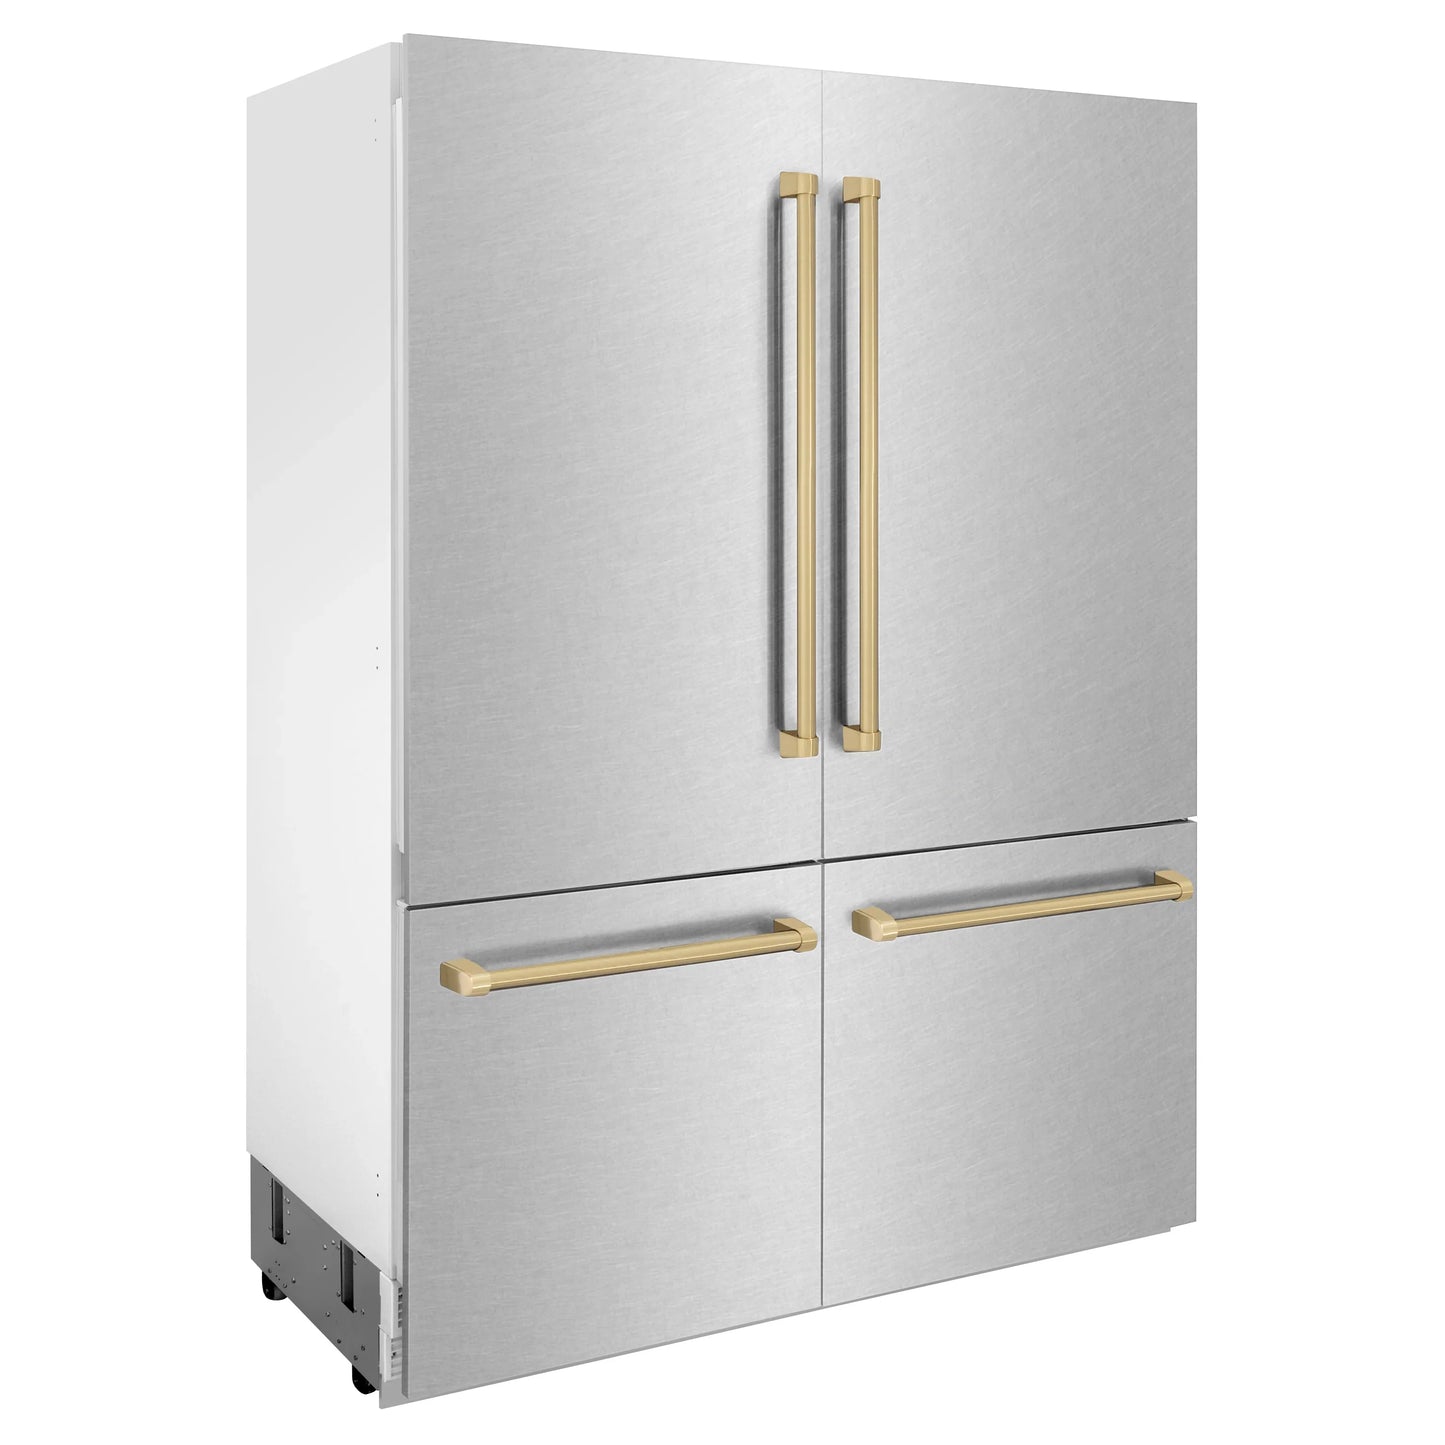 ZLINE 60" Autograph Refrigerator with Internal Water & Ice Dispenser in Fingerprint Resistant Stainless Steel with Bronze Accents